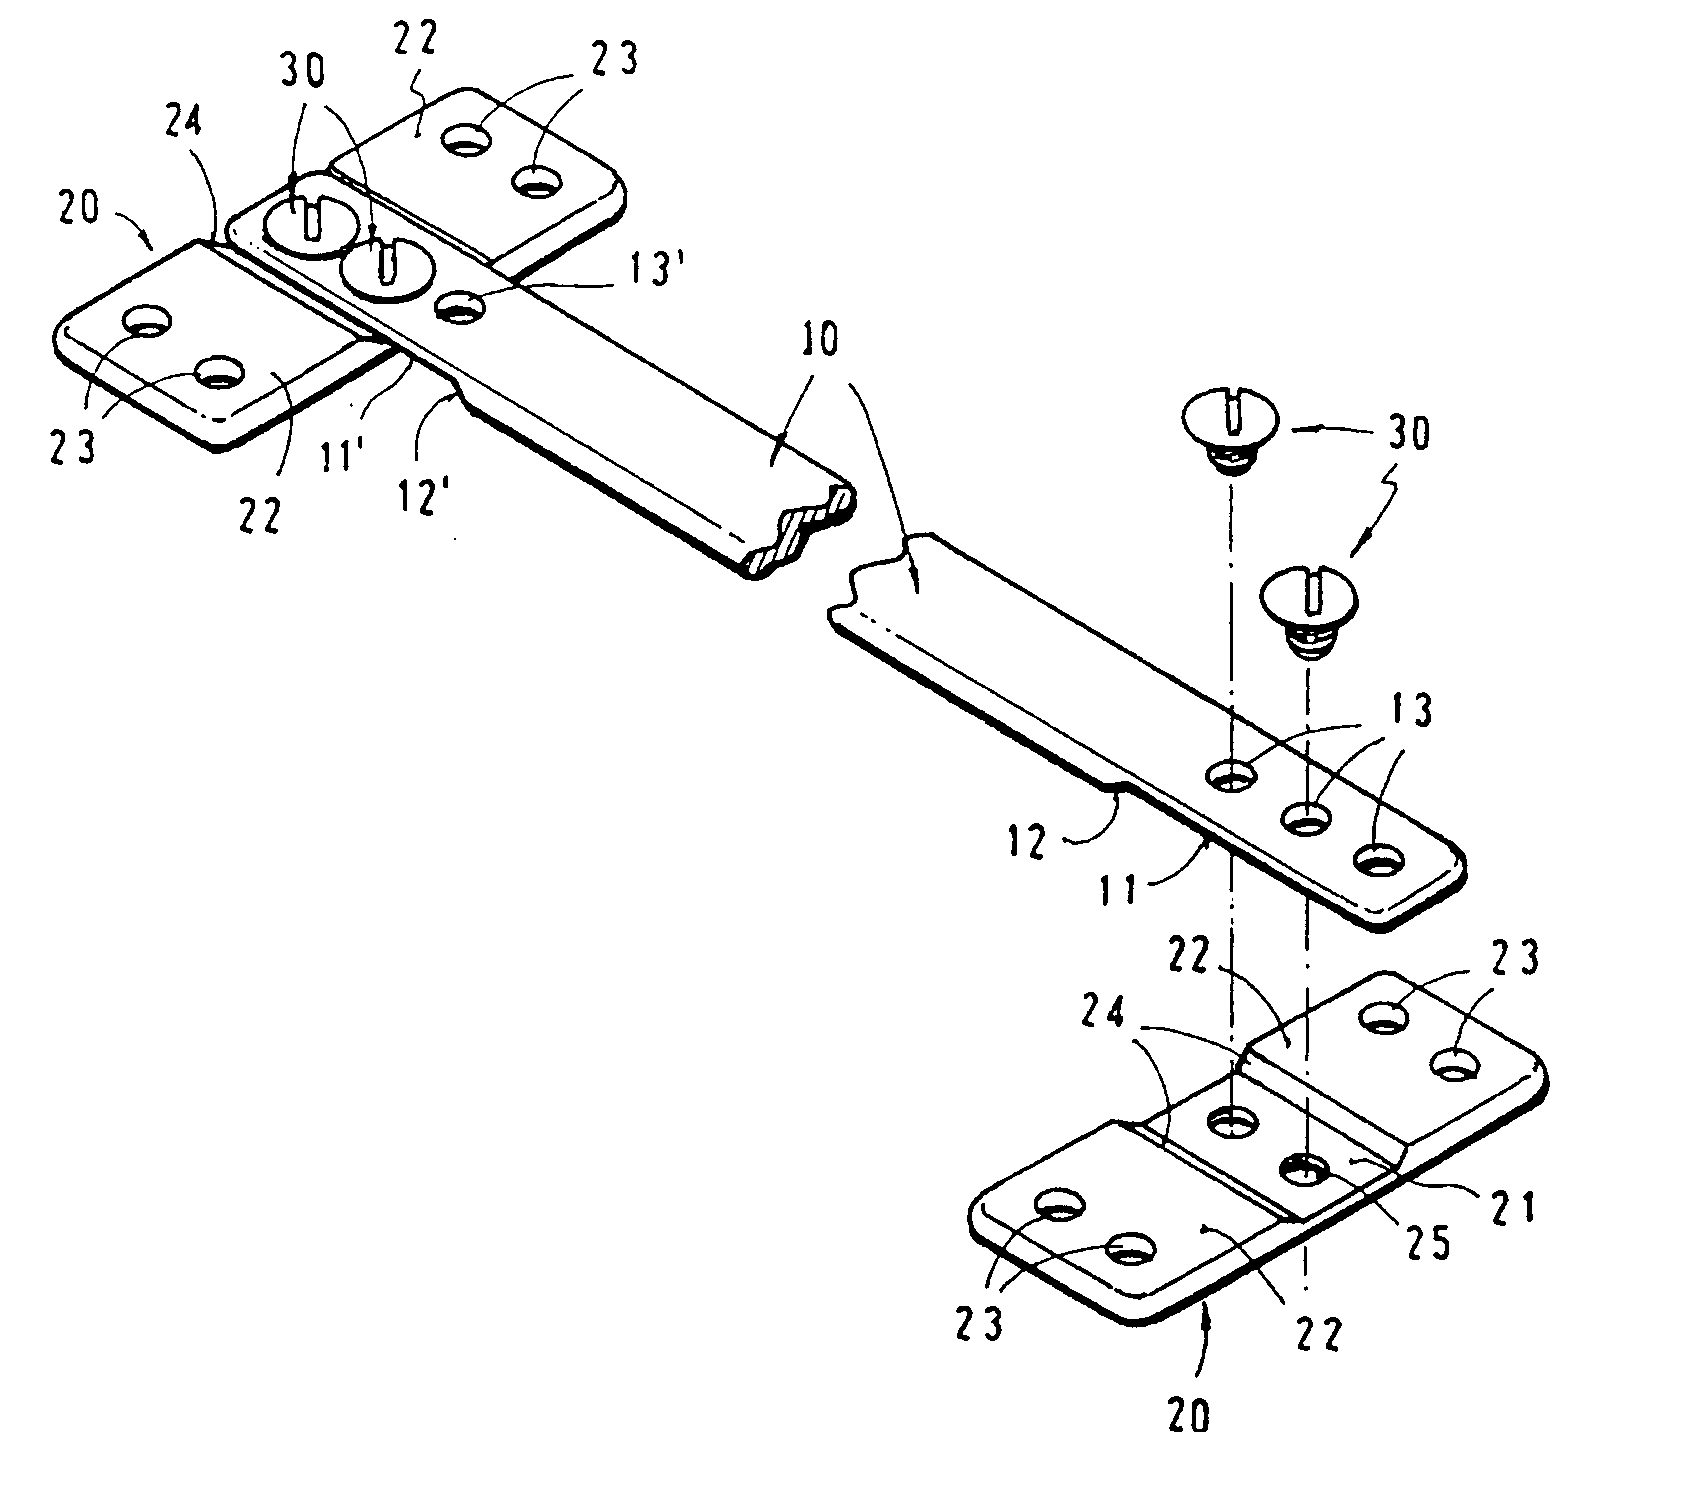 Apparatus for the correction of chest wall deformities such as pectus carinatum and method of using the same